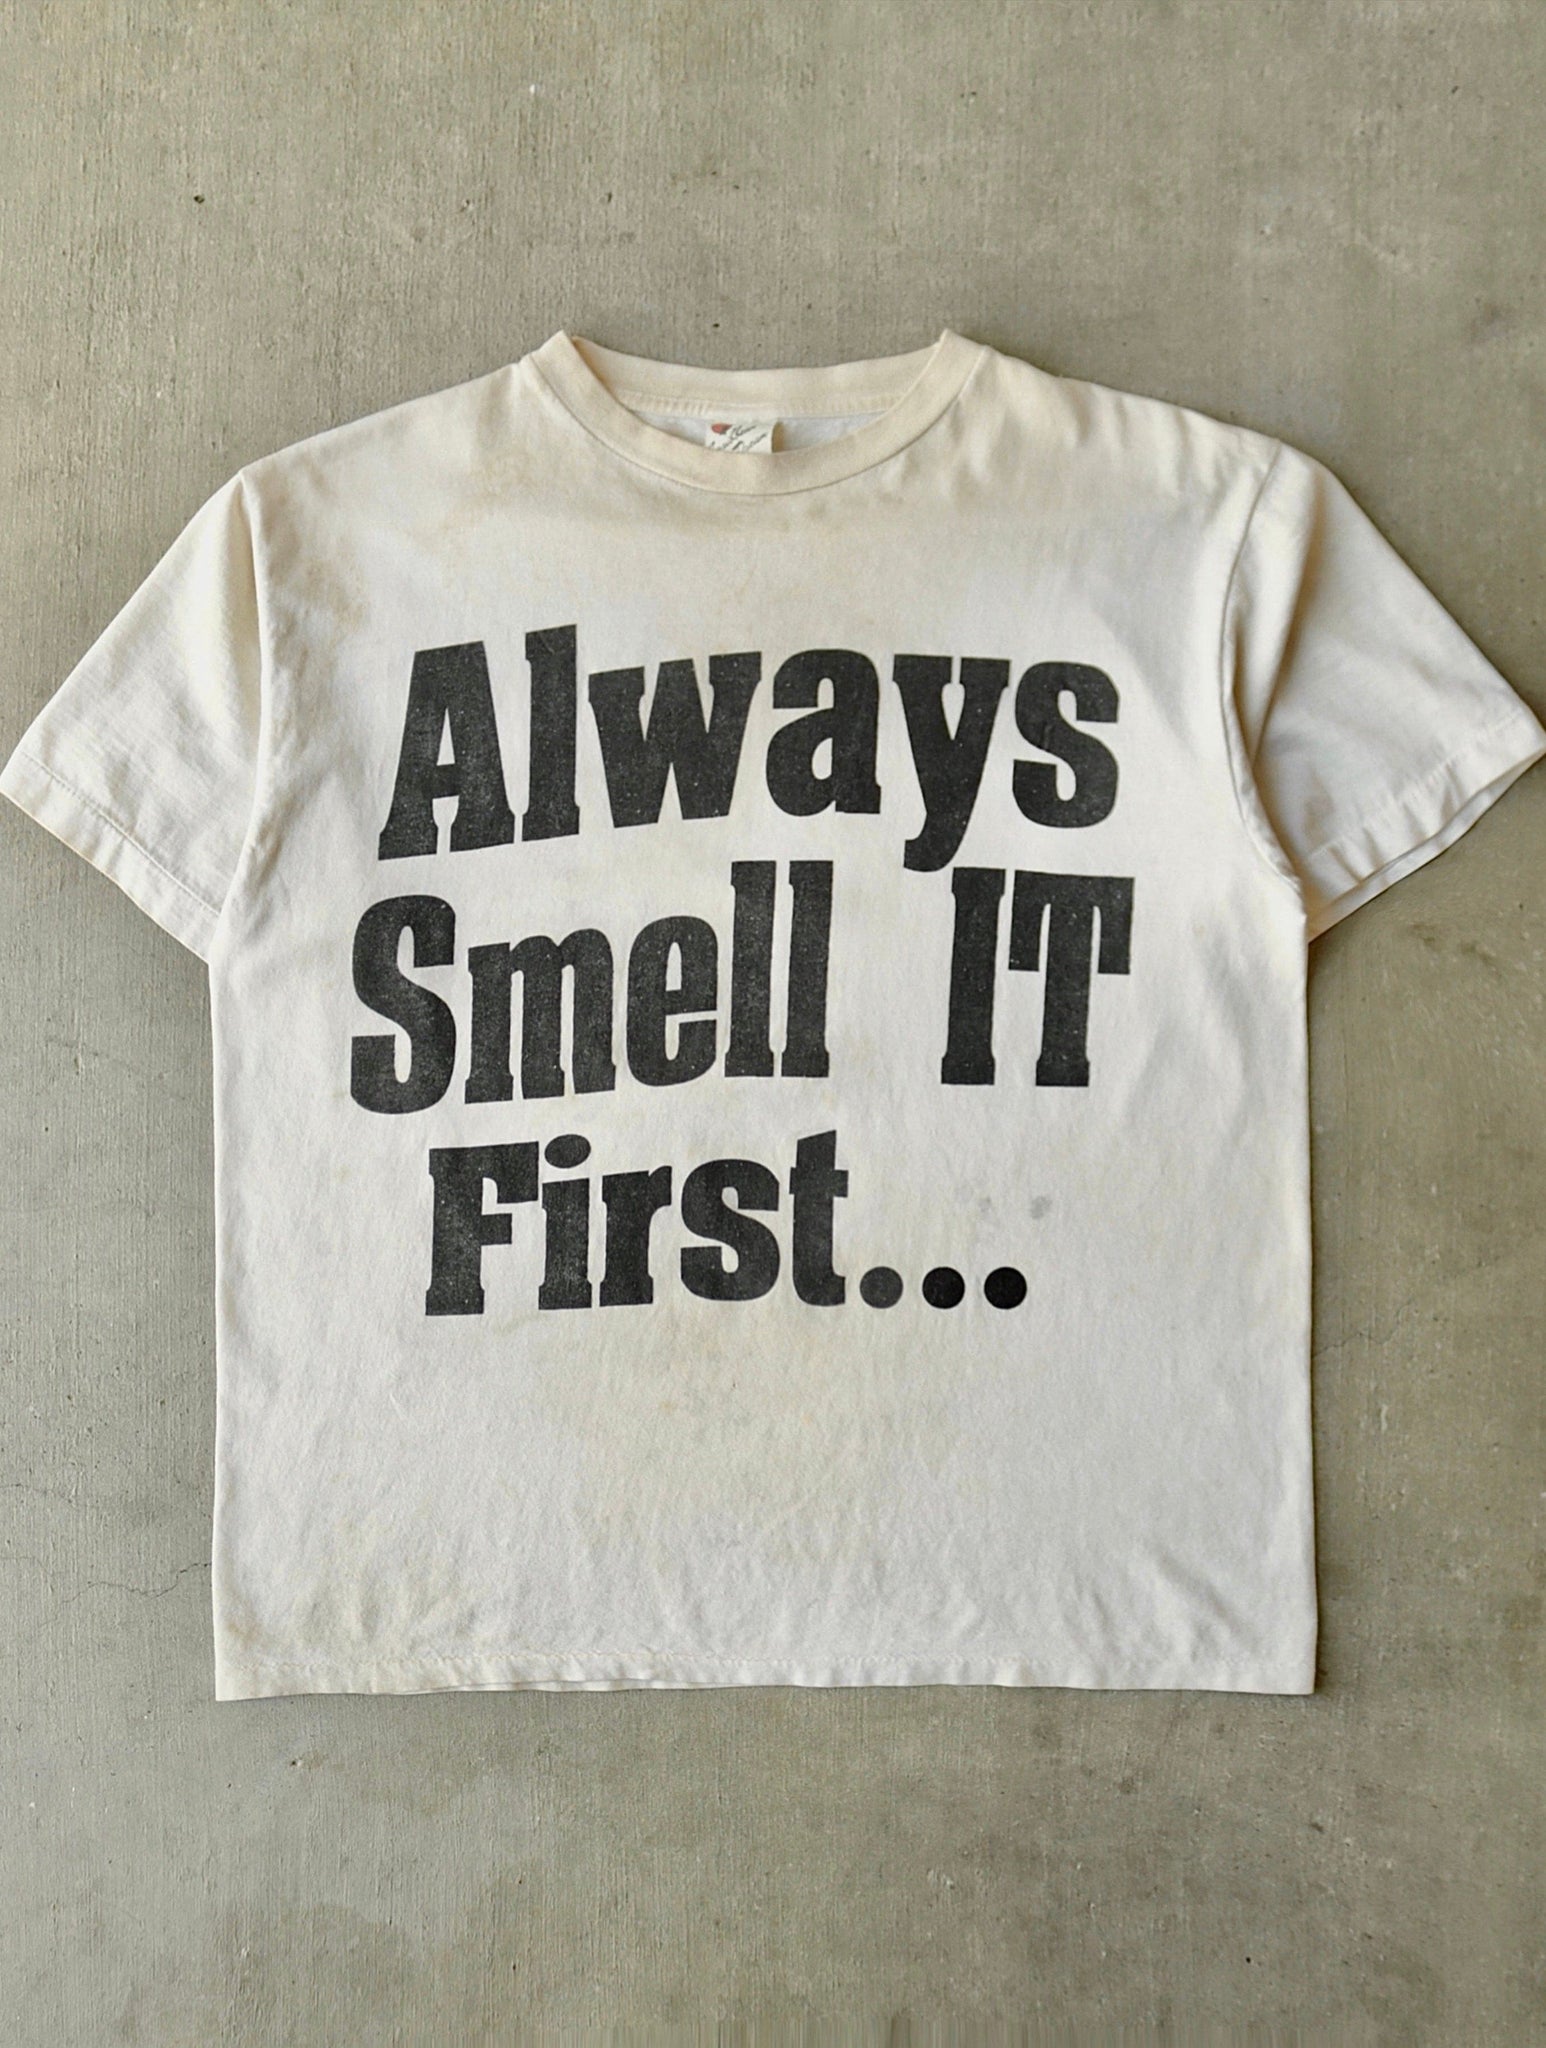 1992 'ALWAYS SMELL IT FIRST' ボクシー T シャツ - L